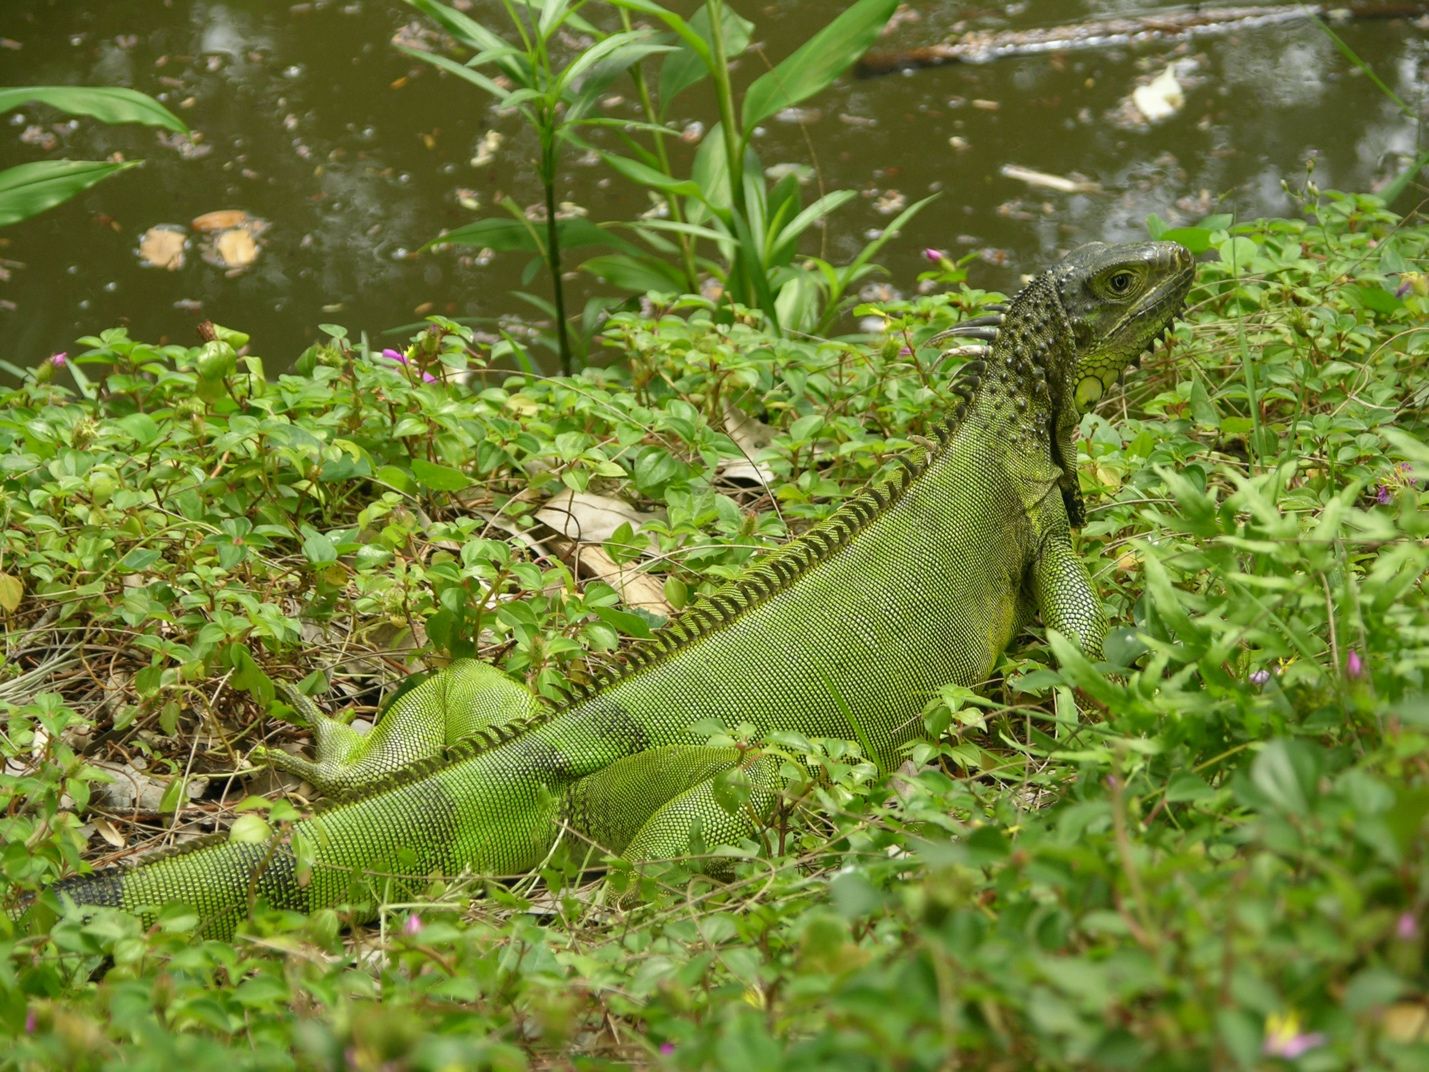 Juvenile and adult green iguanas (Iguana iguana) may be green, but many adults are not green. 